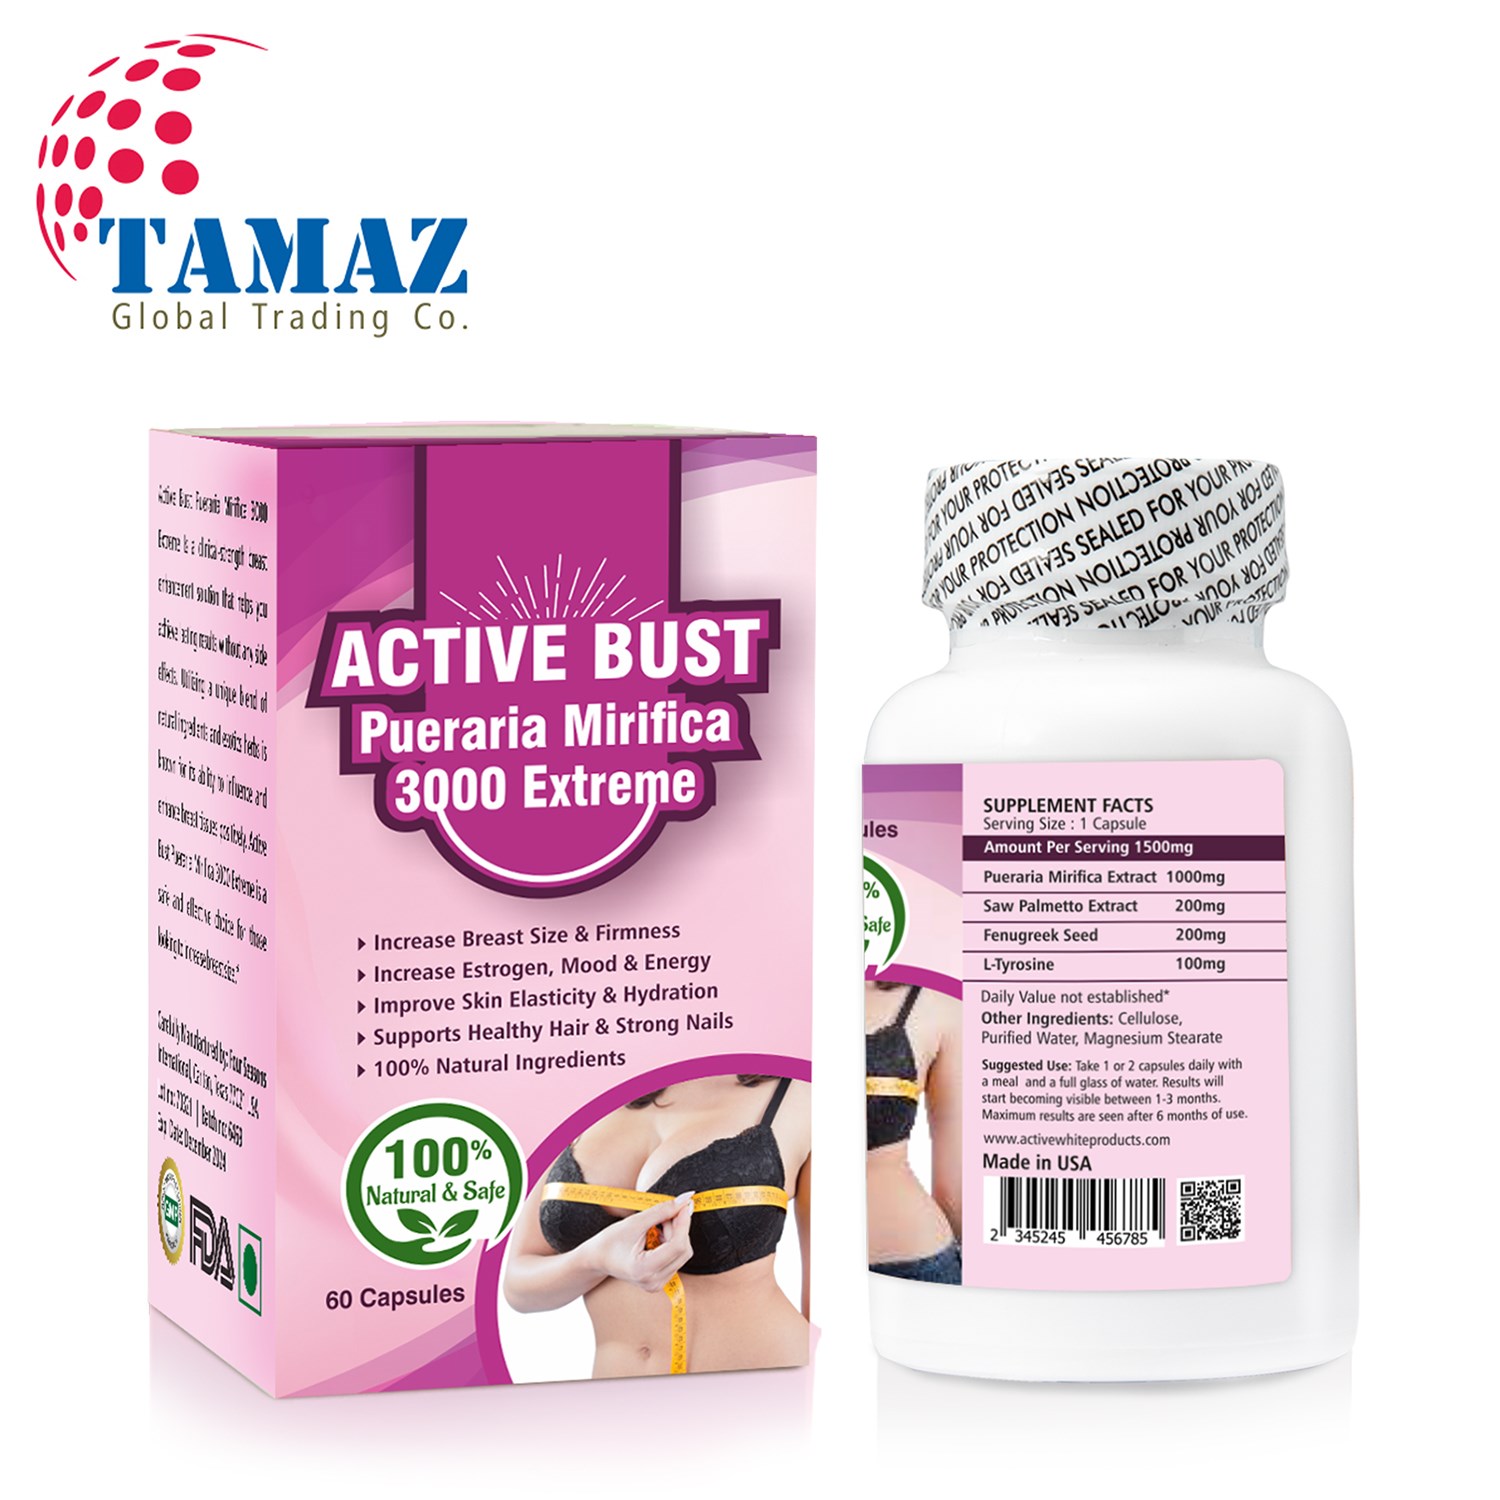 active bust pueraria mirifica 3000 extreme